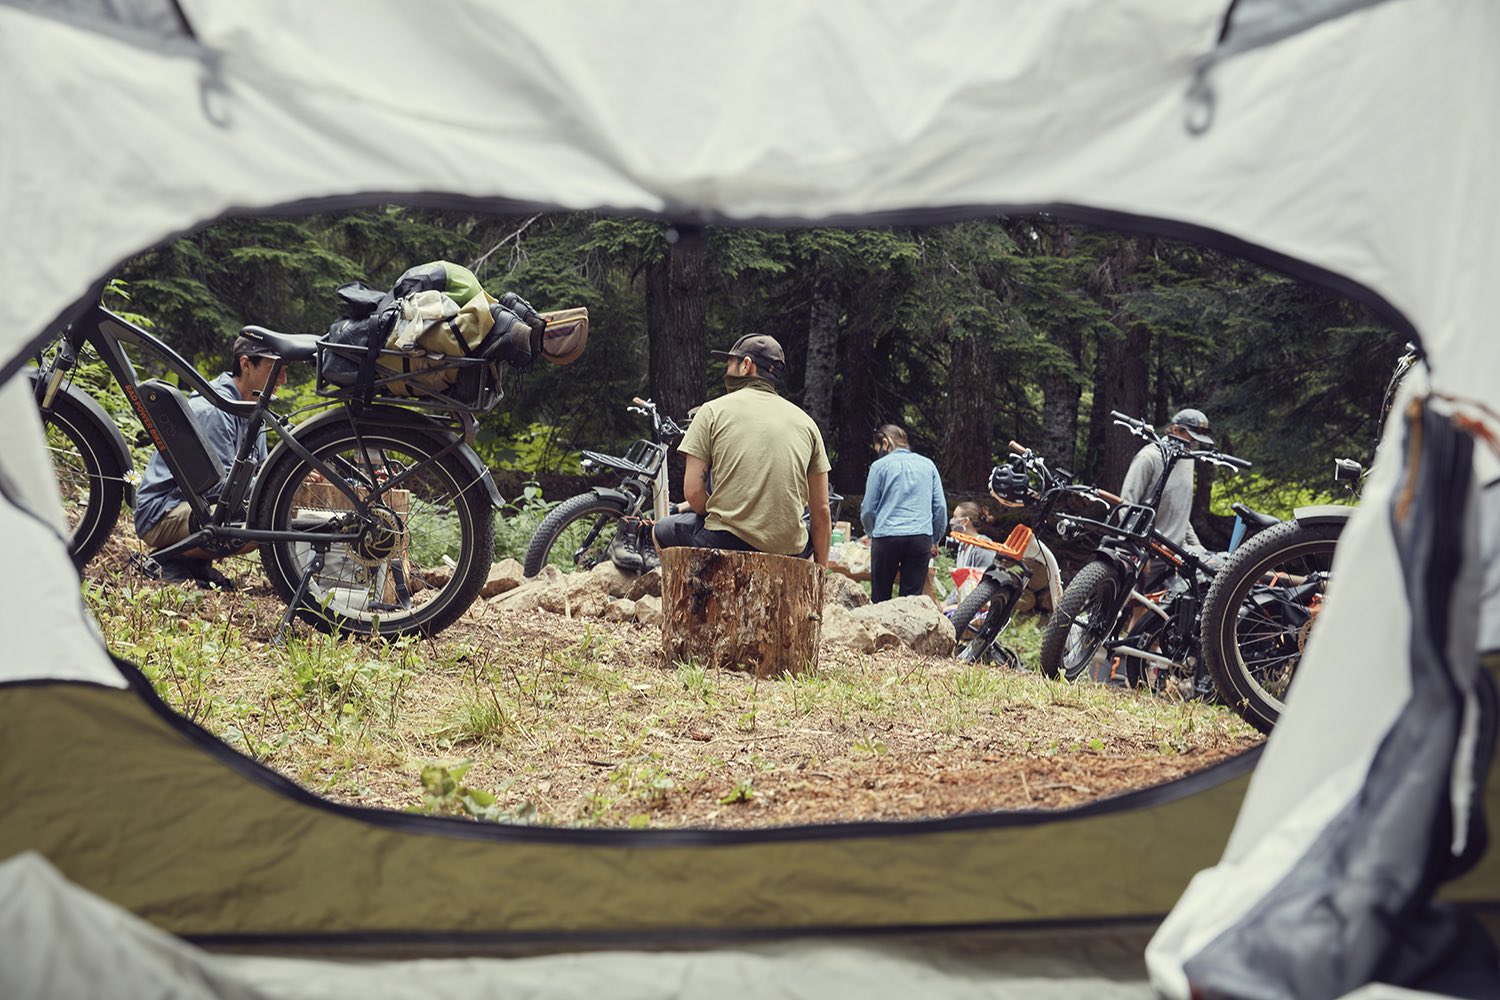 Looking outside a tent, we can see several people camping with their ebikes from Rad Power Bikes.